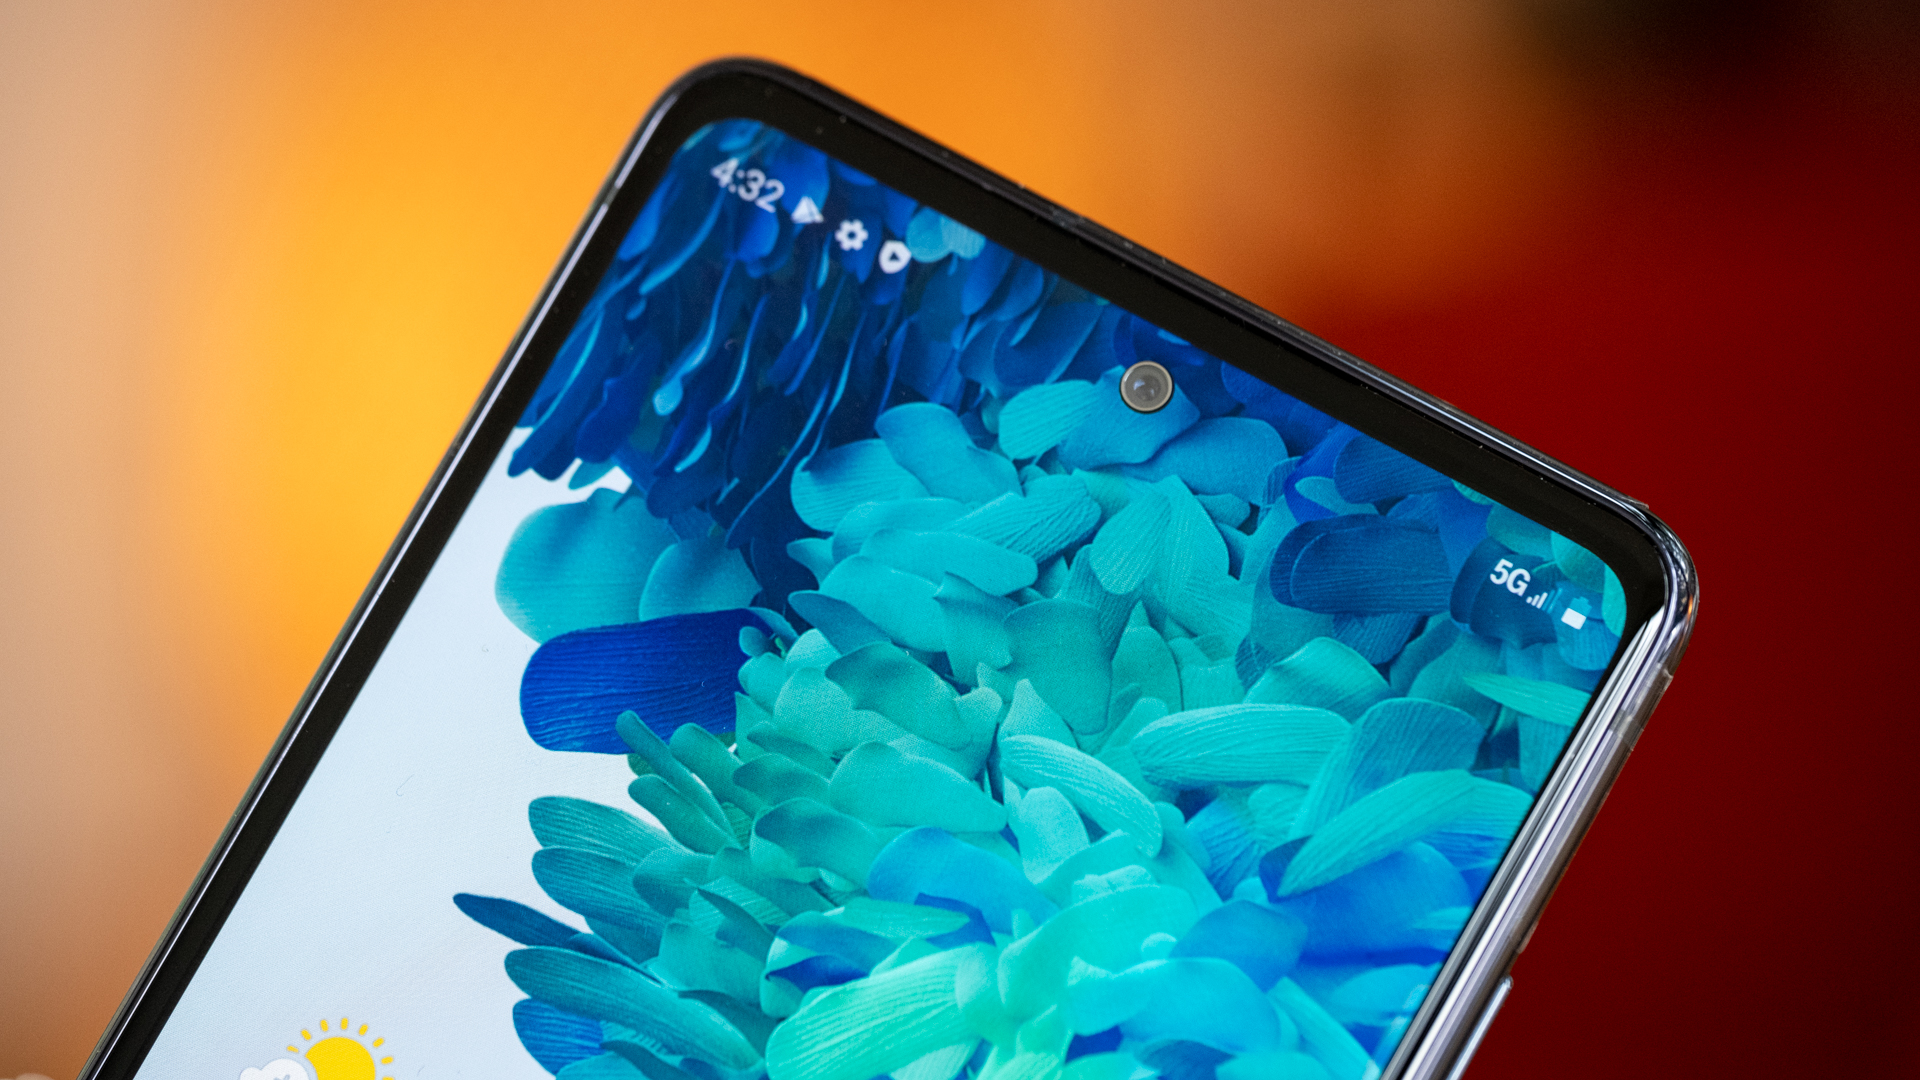 Samsung Galaxy S20 FE review second opinion: Almost a OnePlus killer